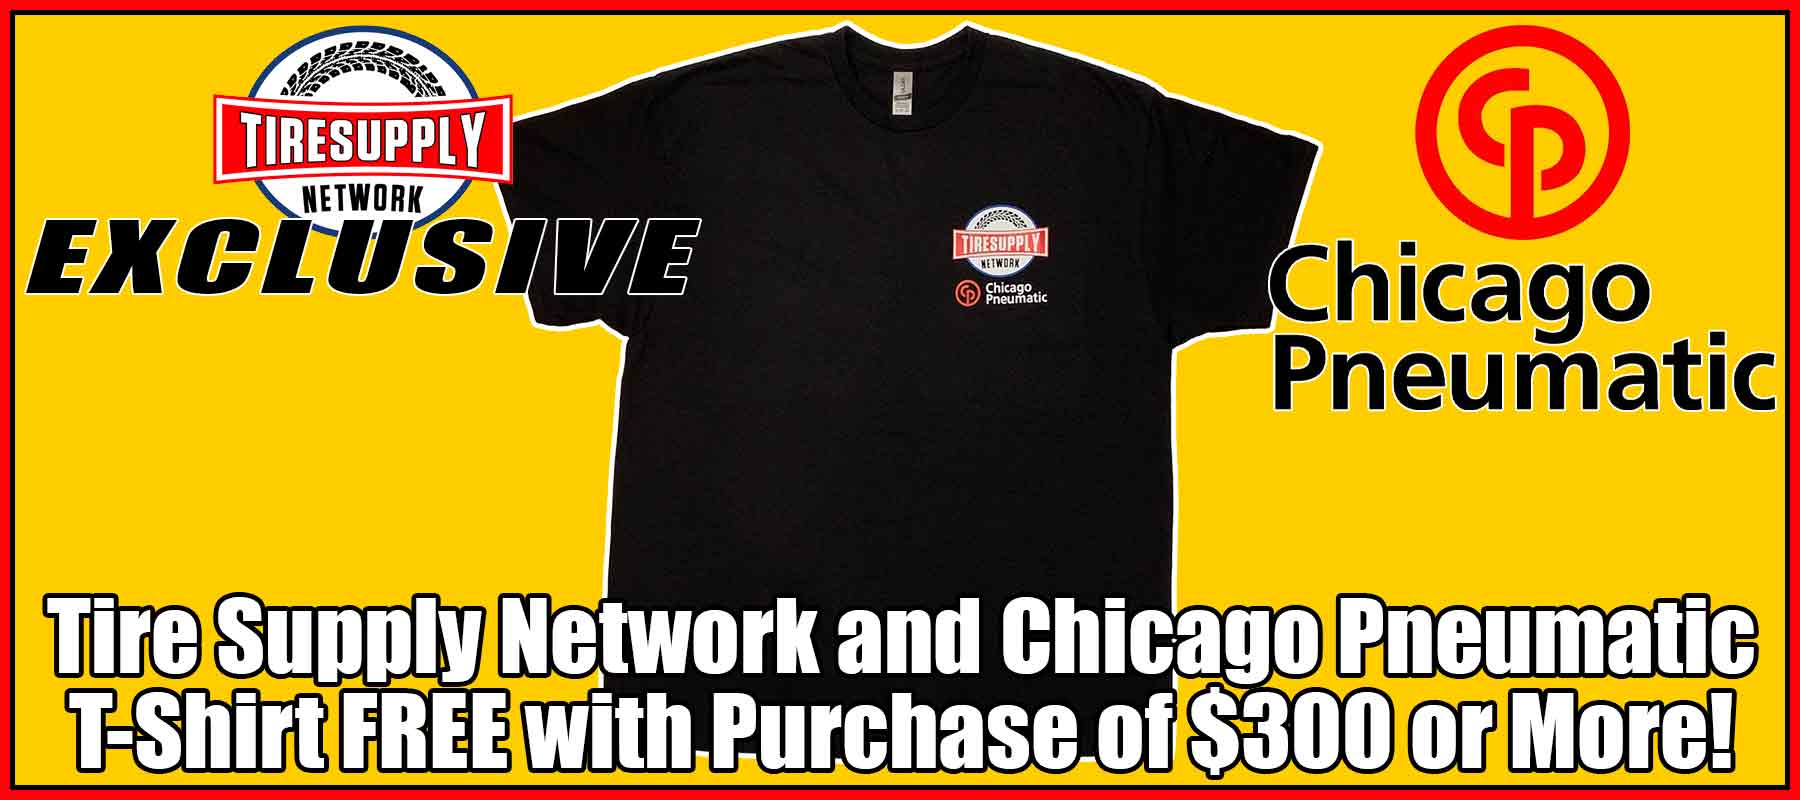 Tire Supply Network & Chicago Pneumatic T-Shirt FREE with ANY Purchase of $300 or More!